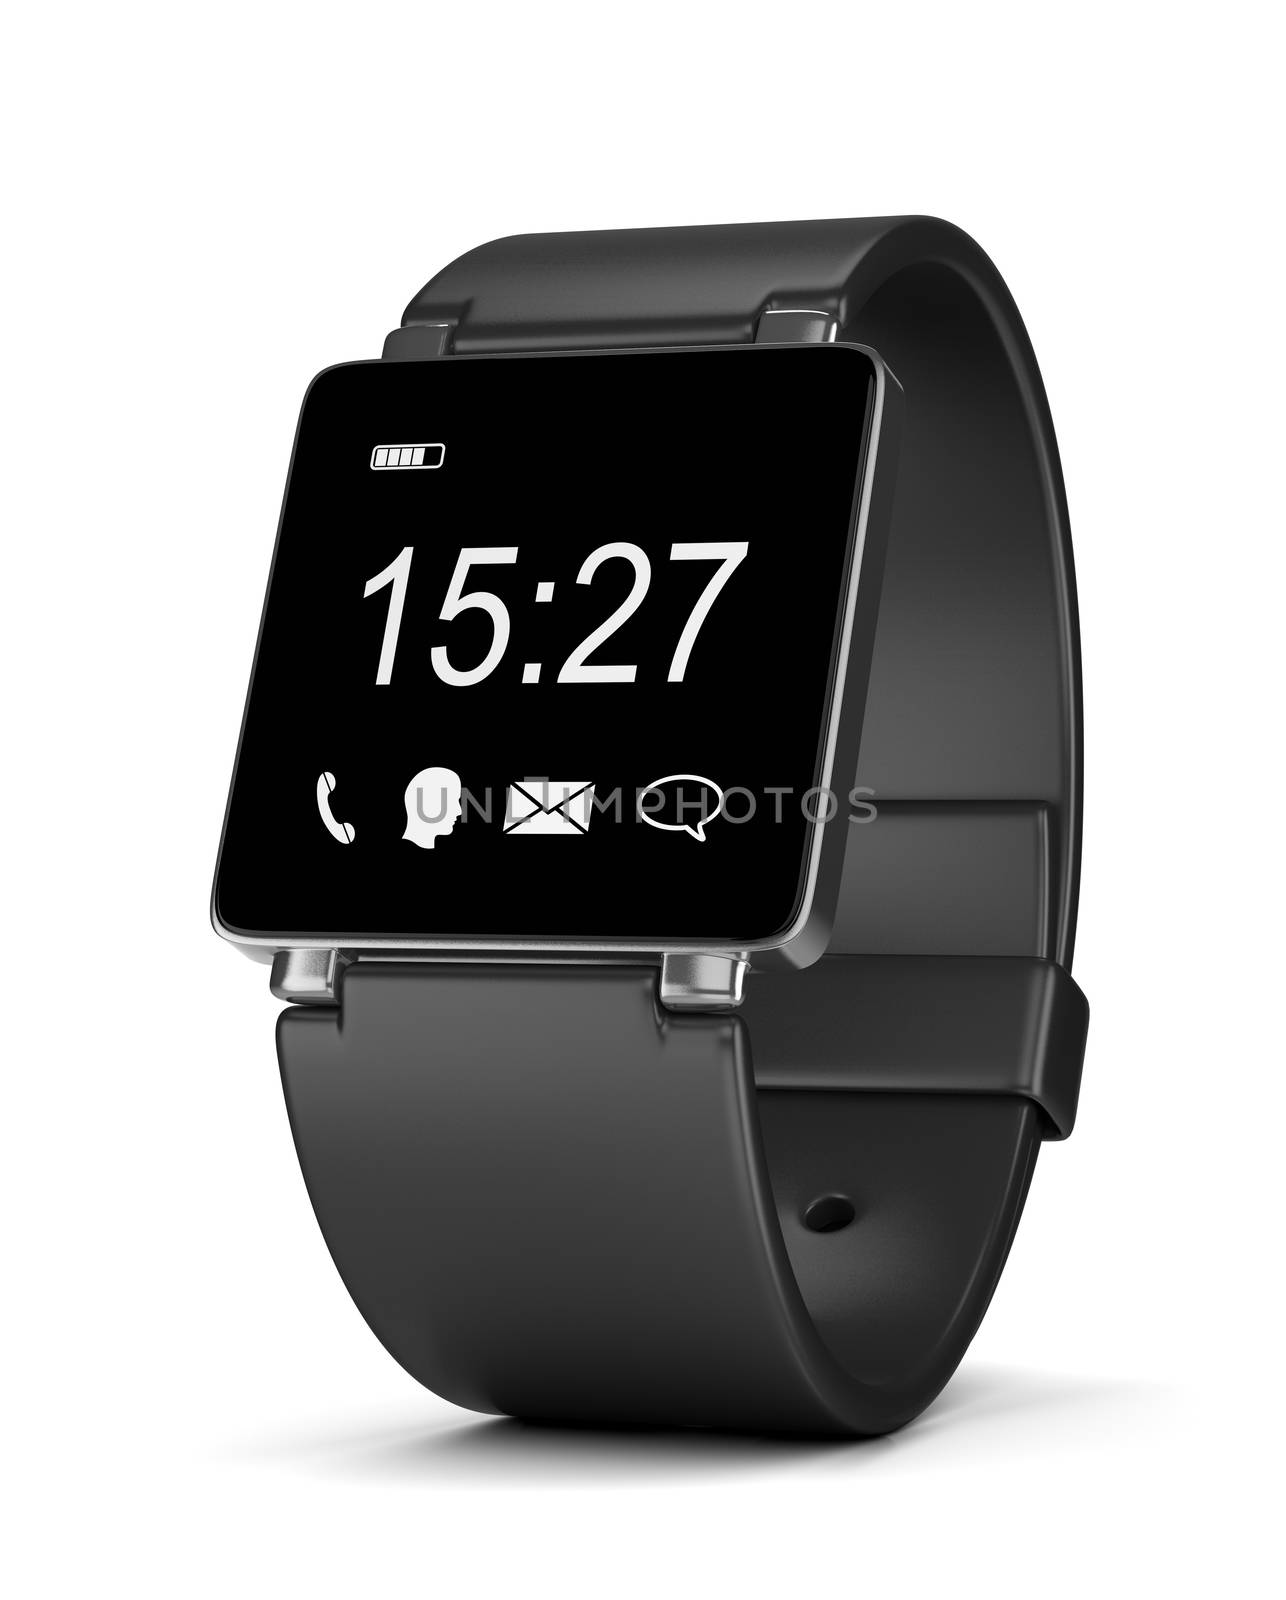 Black Smartwatch with App Icons, Digital Clock and Battery Level on Display on White Background 3D Illustration